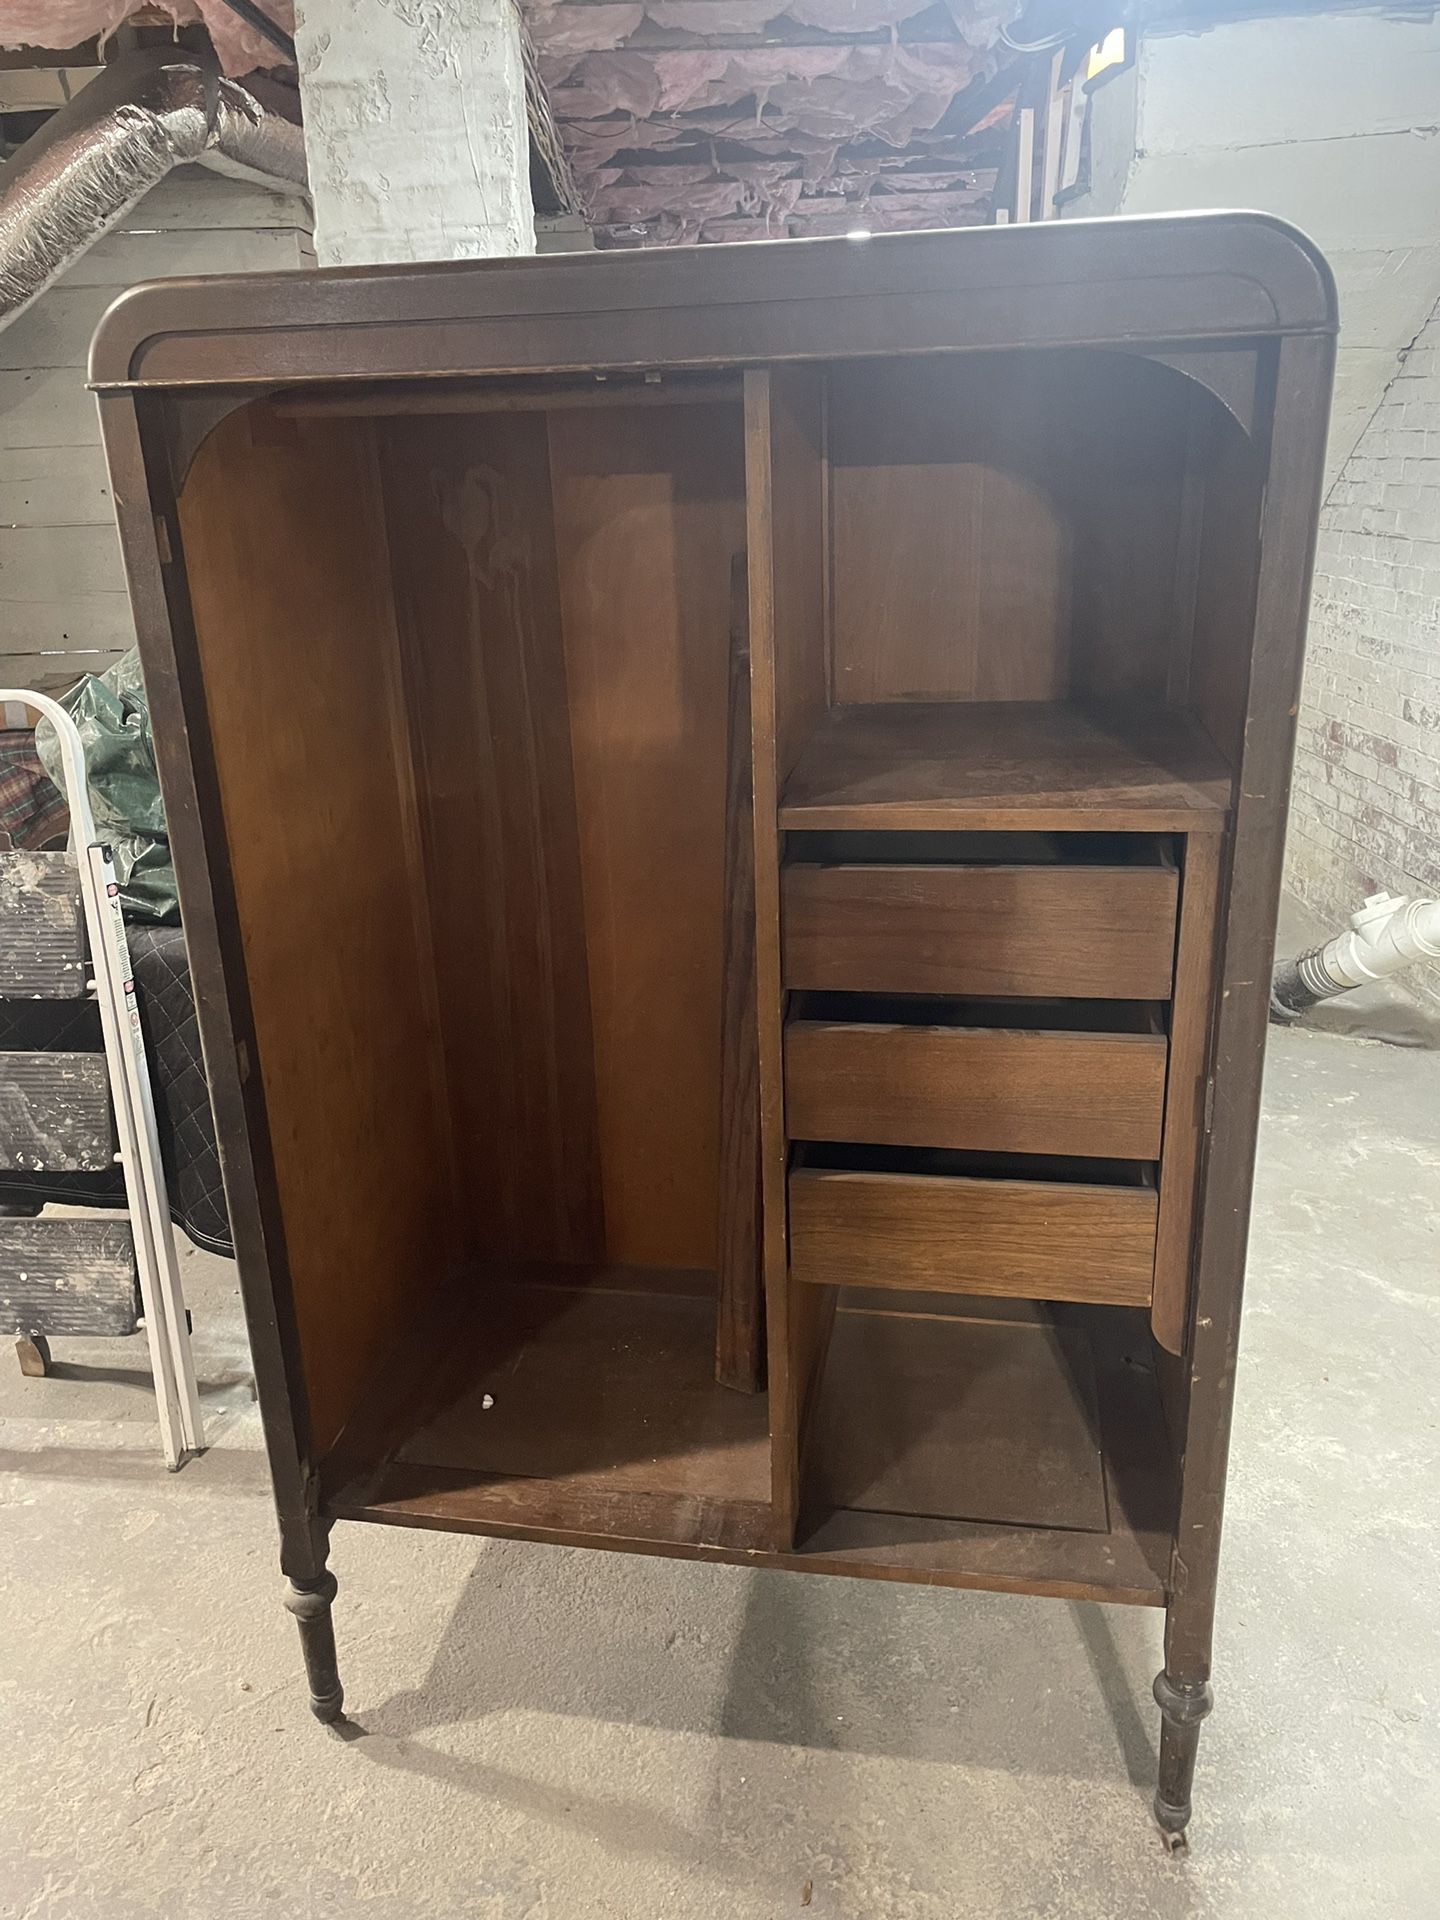 Antique Armoire 80+ Years Old